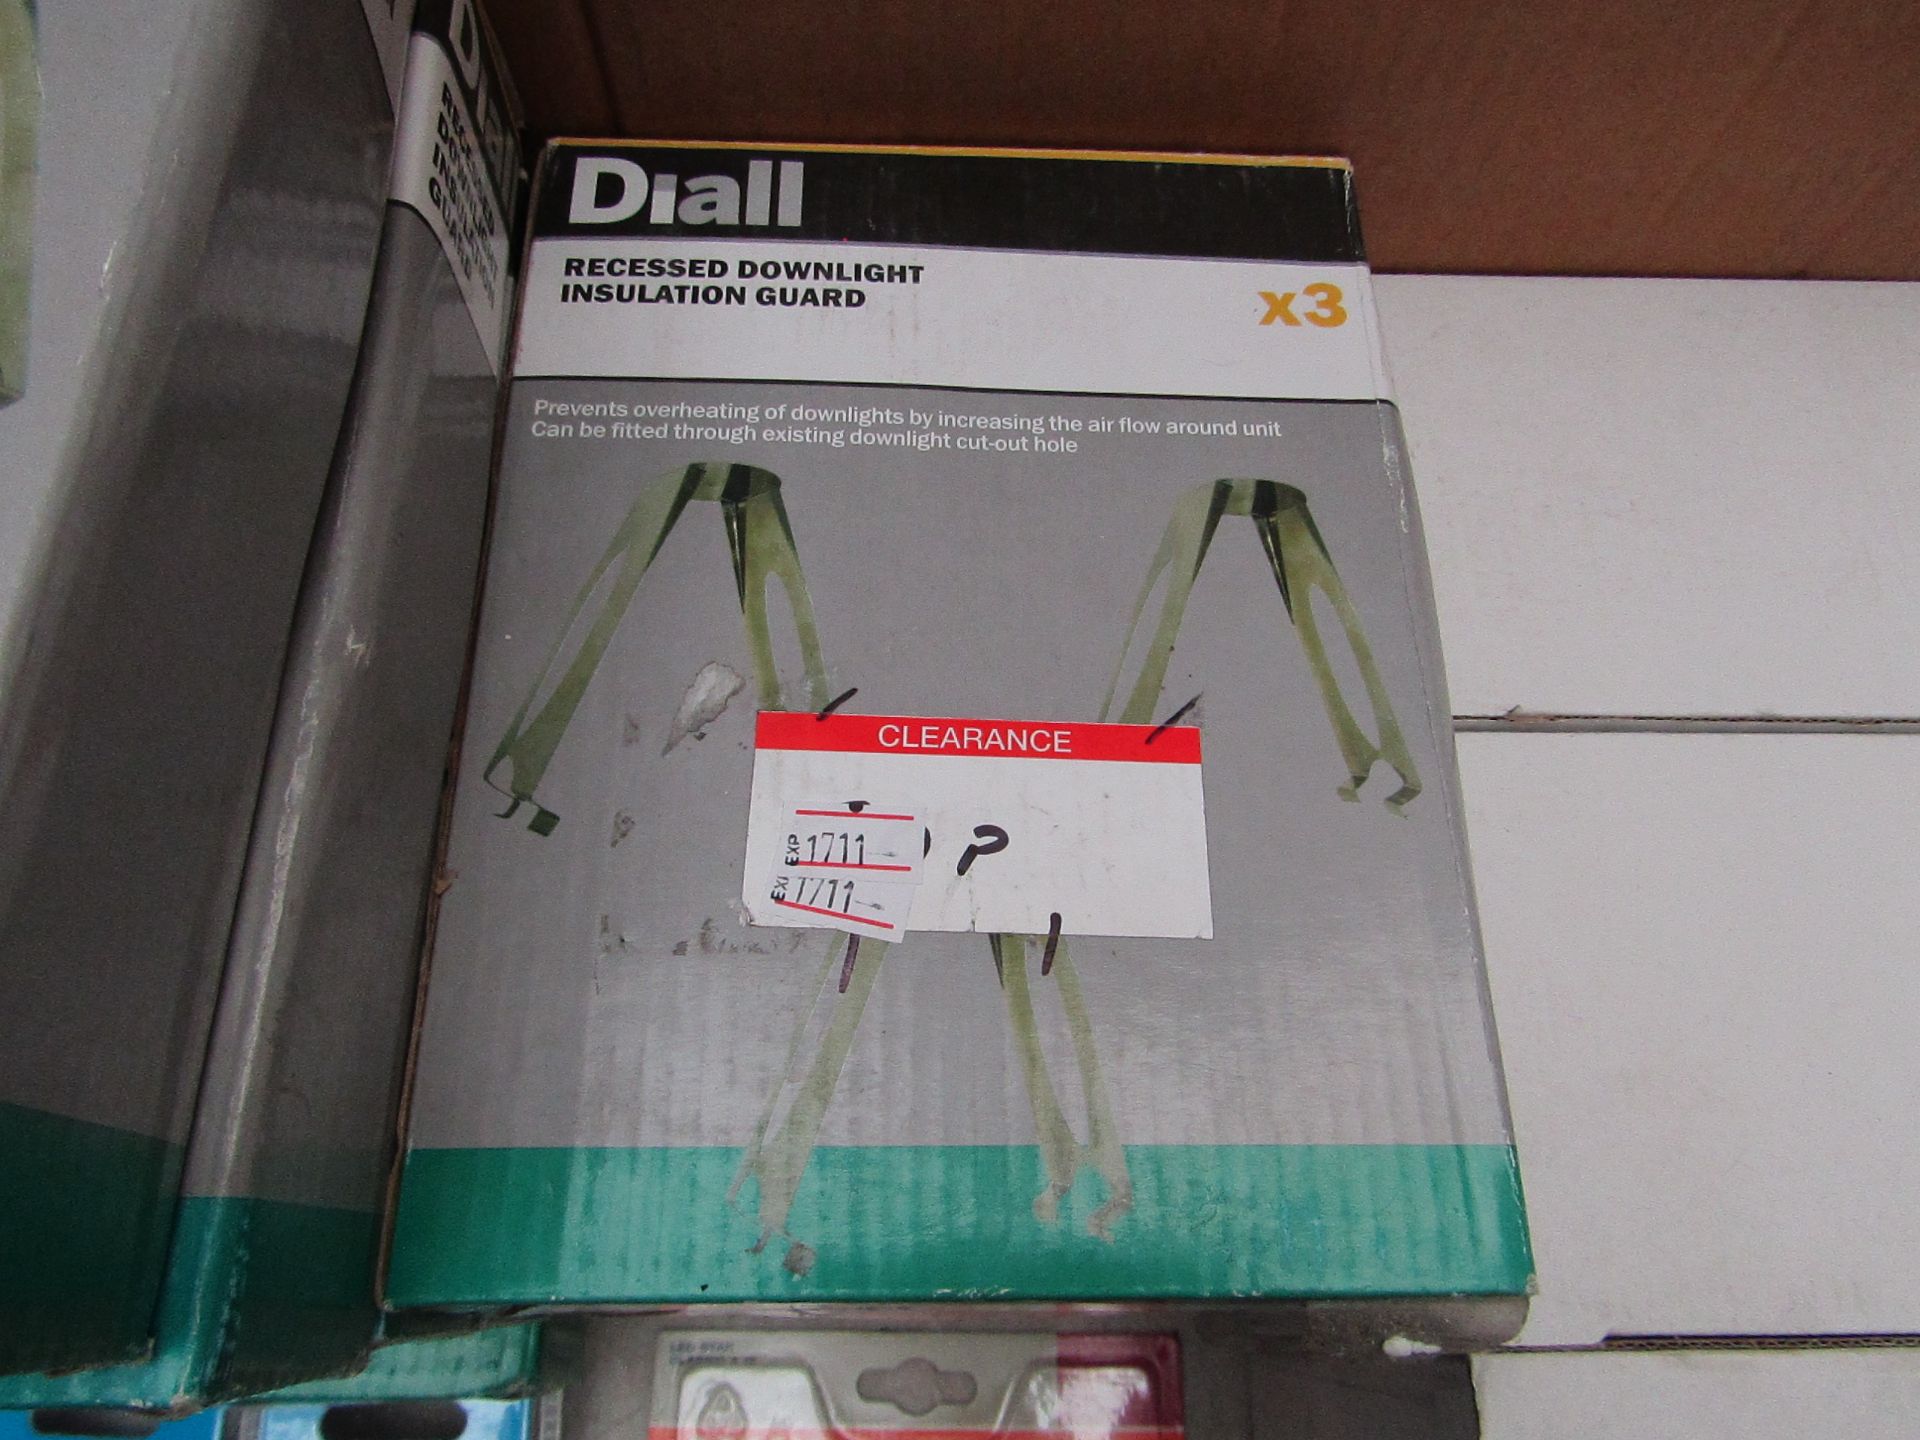 5x Diall - Recessed Downlight Insulation Guard ( Sets of 3 Per Box) - Unused & Boxed.